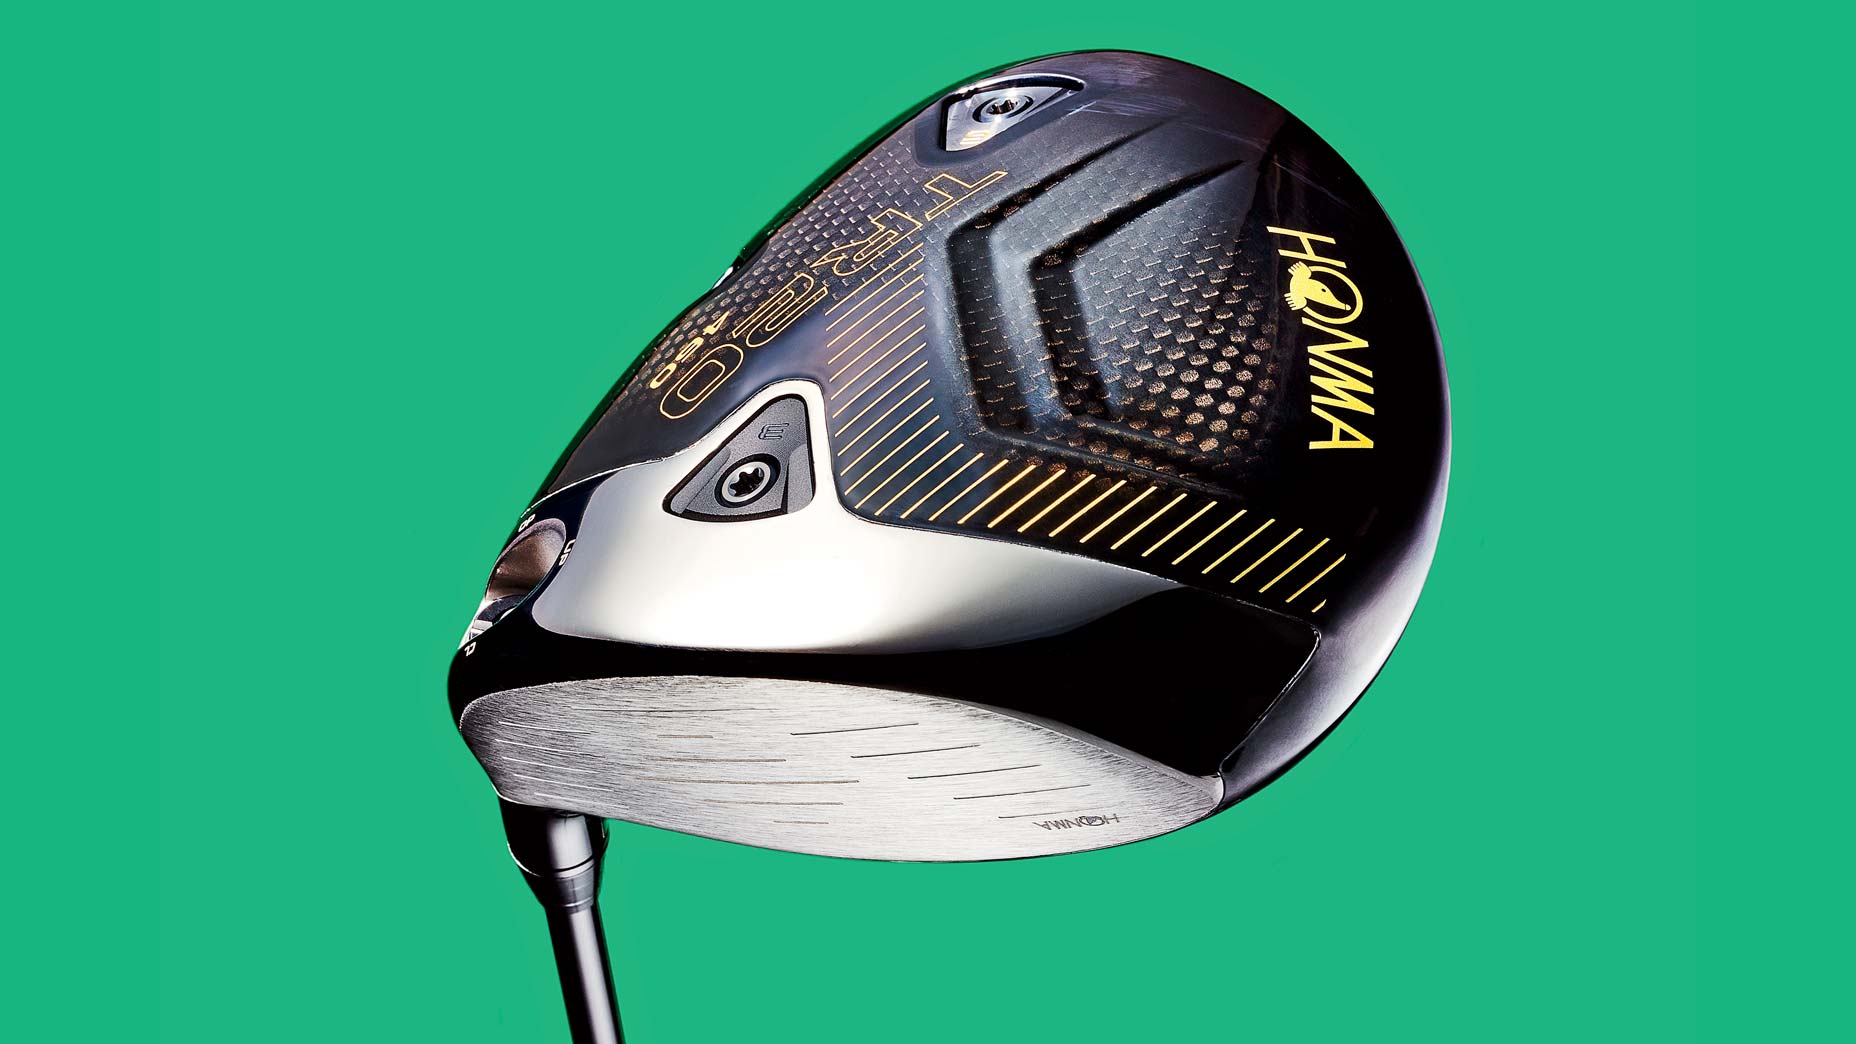 Honma's new TR20 drivers feature top-notch style and speed